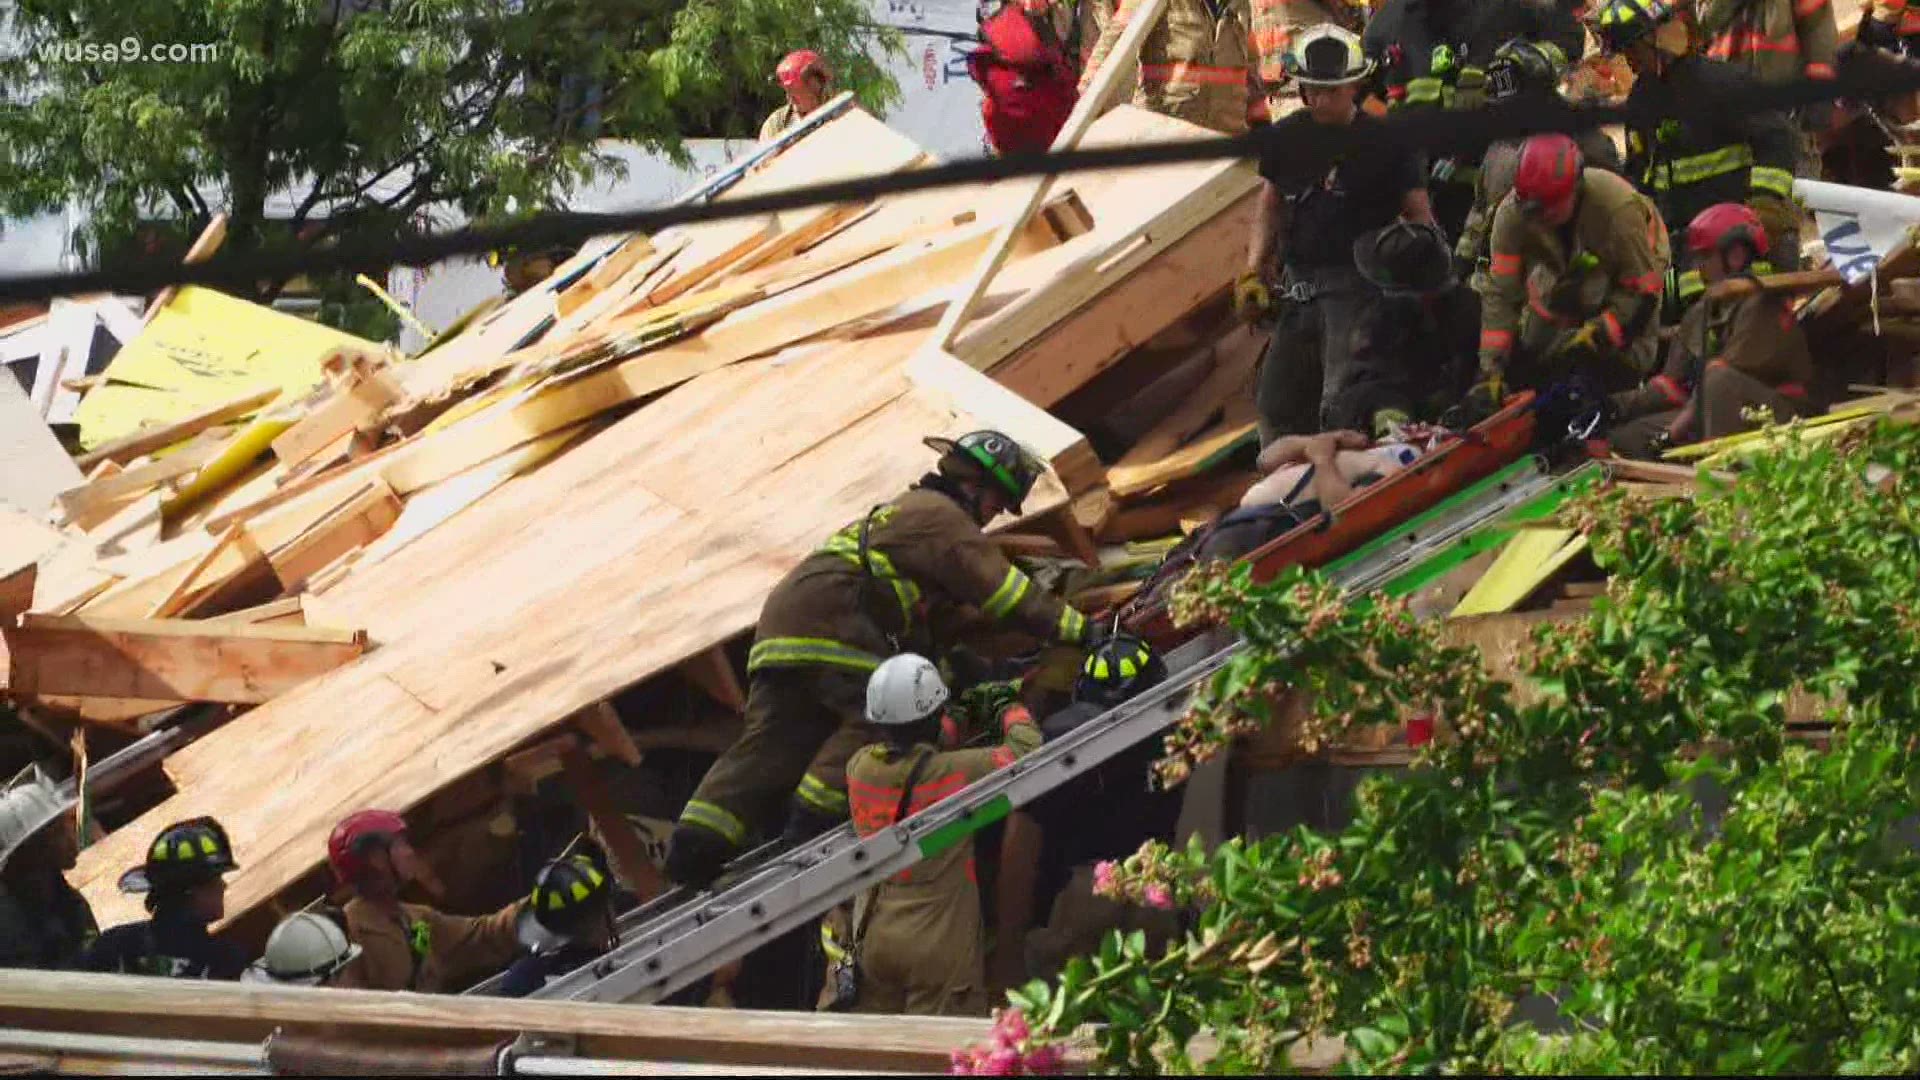 D.C. Fire and EMS told WUSA9 that the five-story building that collapsed was currently under construction. The building collapse occurred during severe weather.